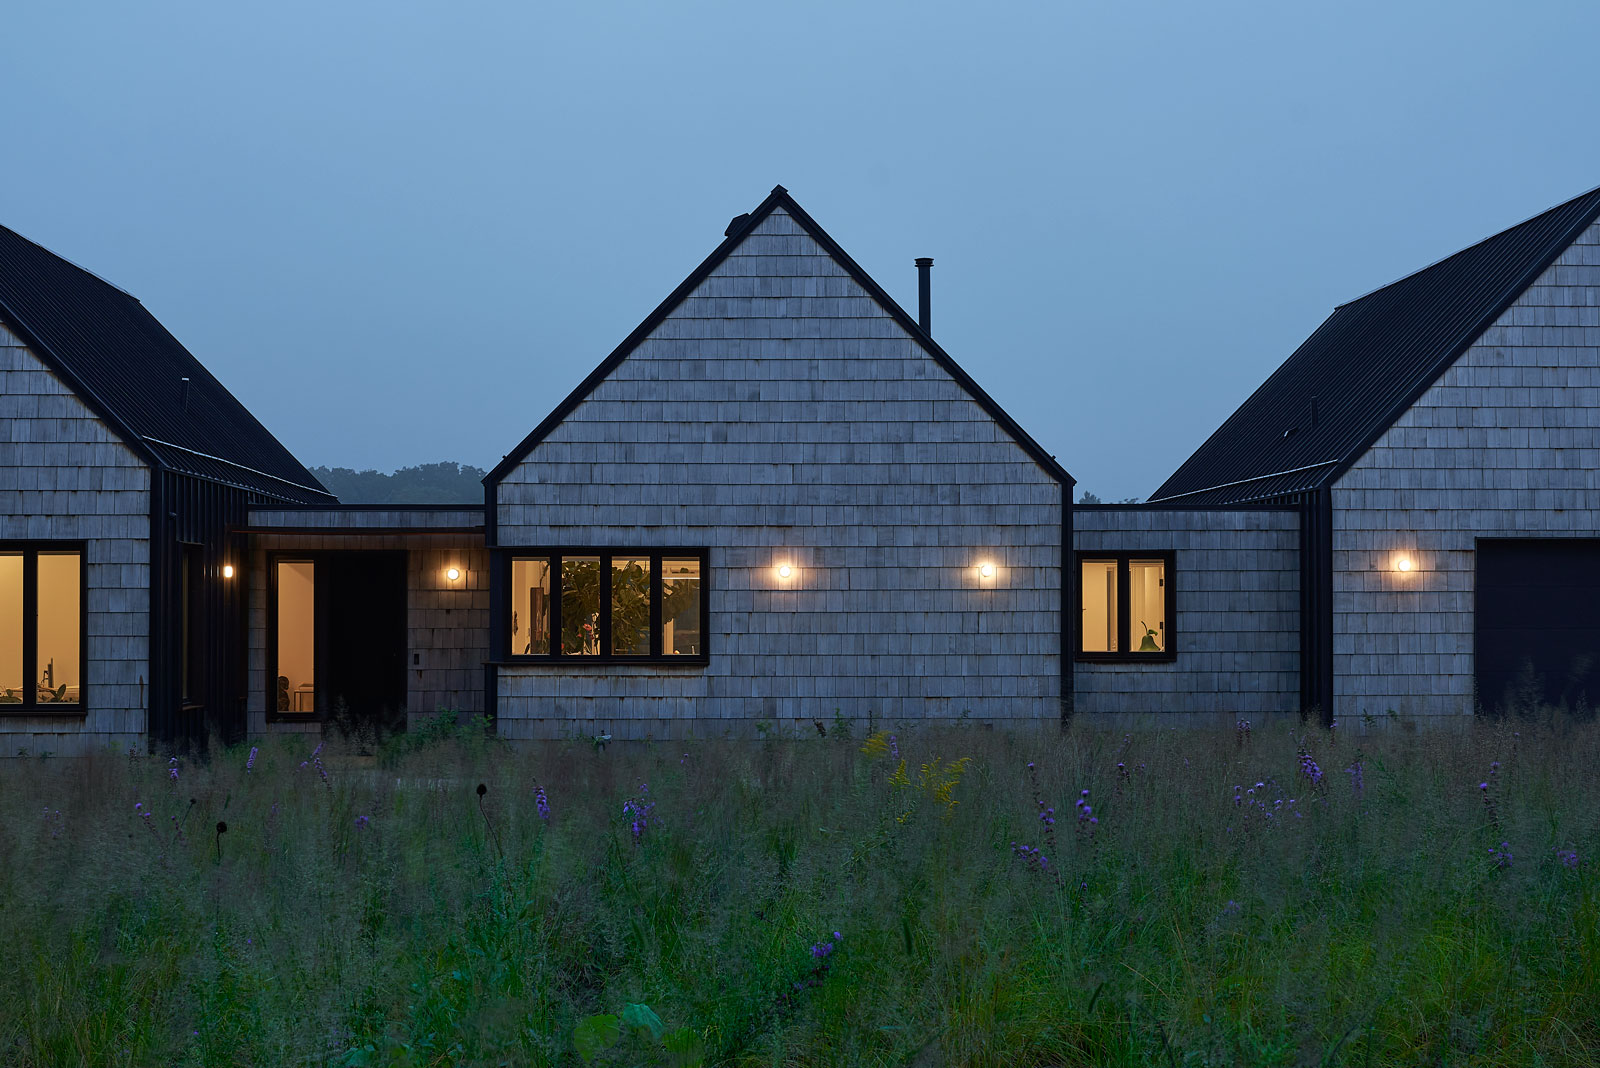 Vibia The Edit - Chicago Architecture Firm Selects Scotch Fixture for Wisconsin Farmhouse